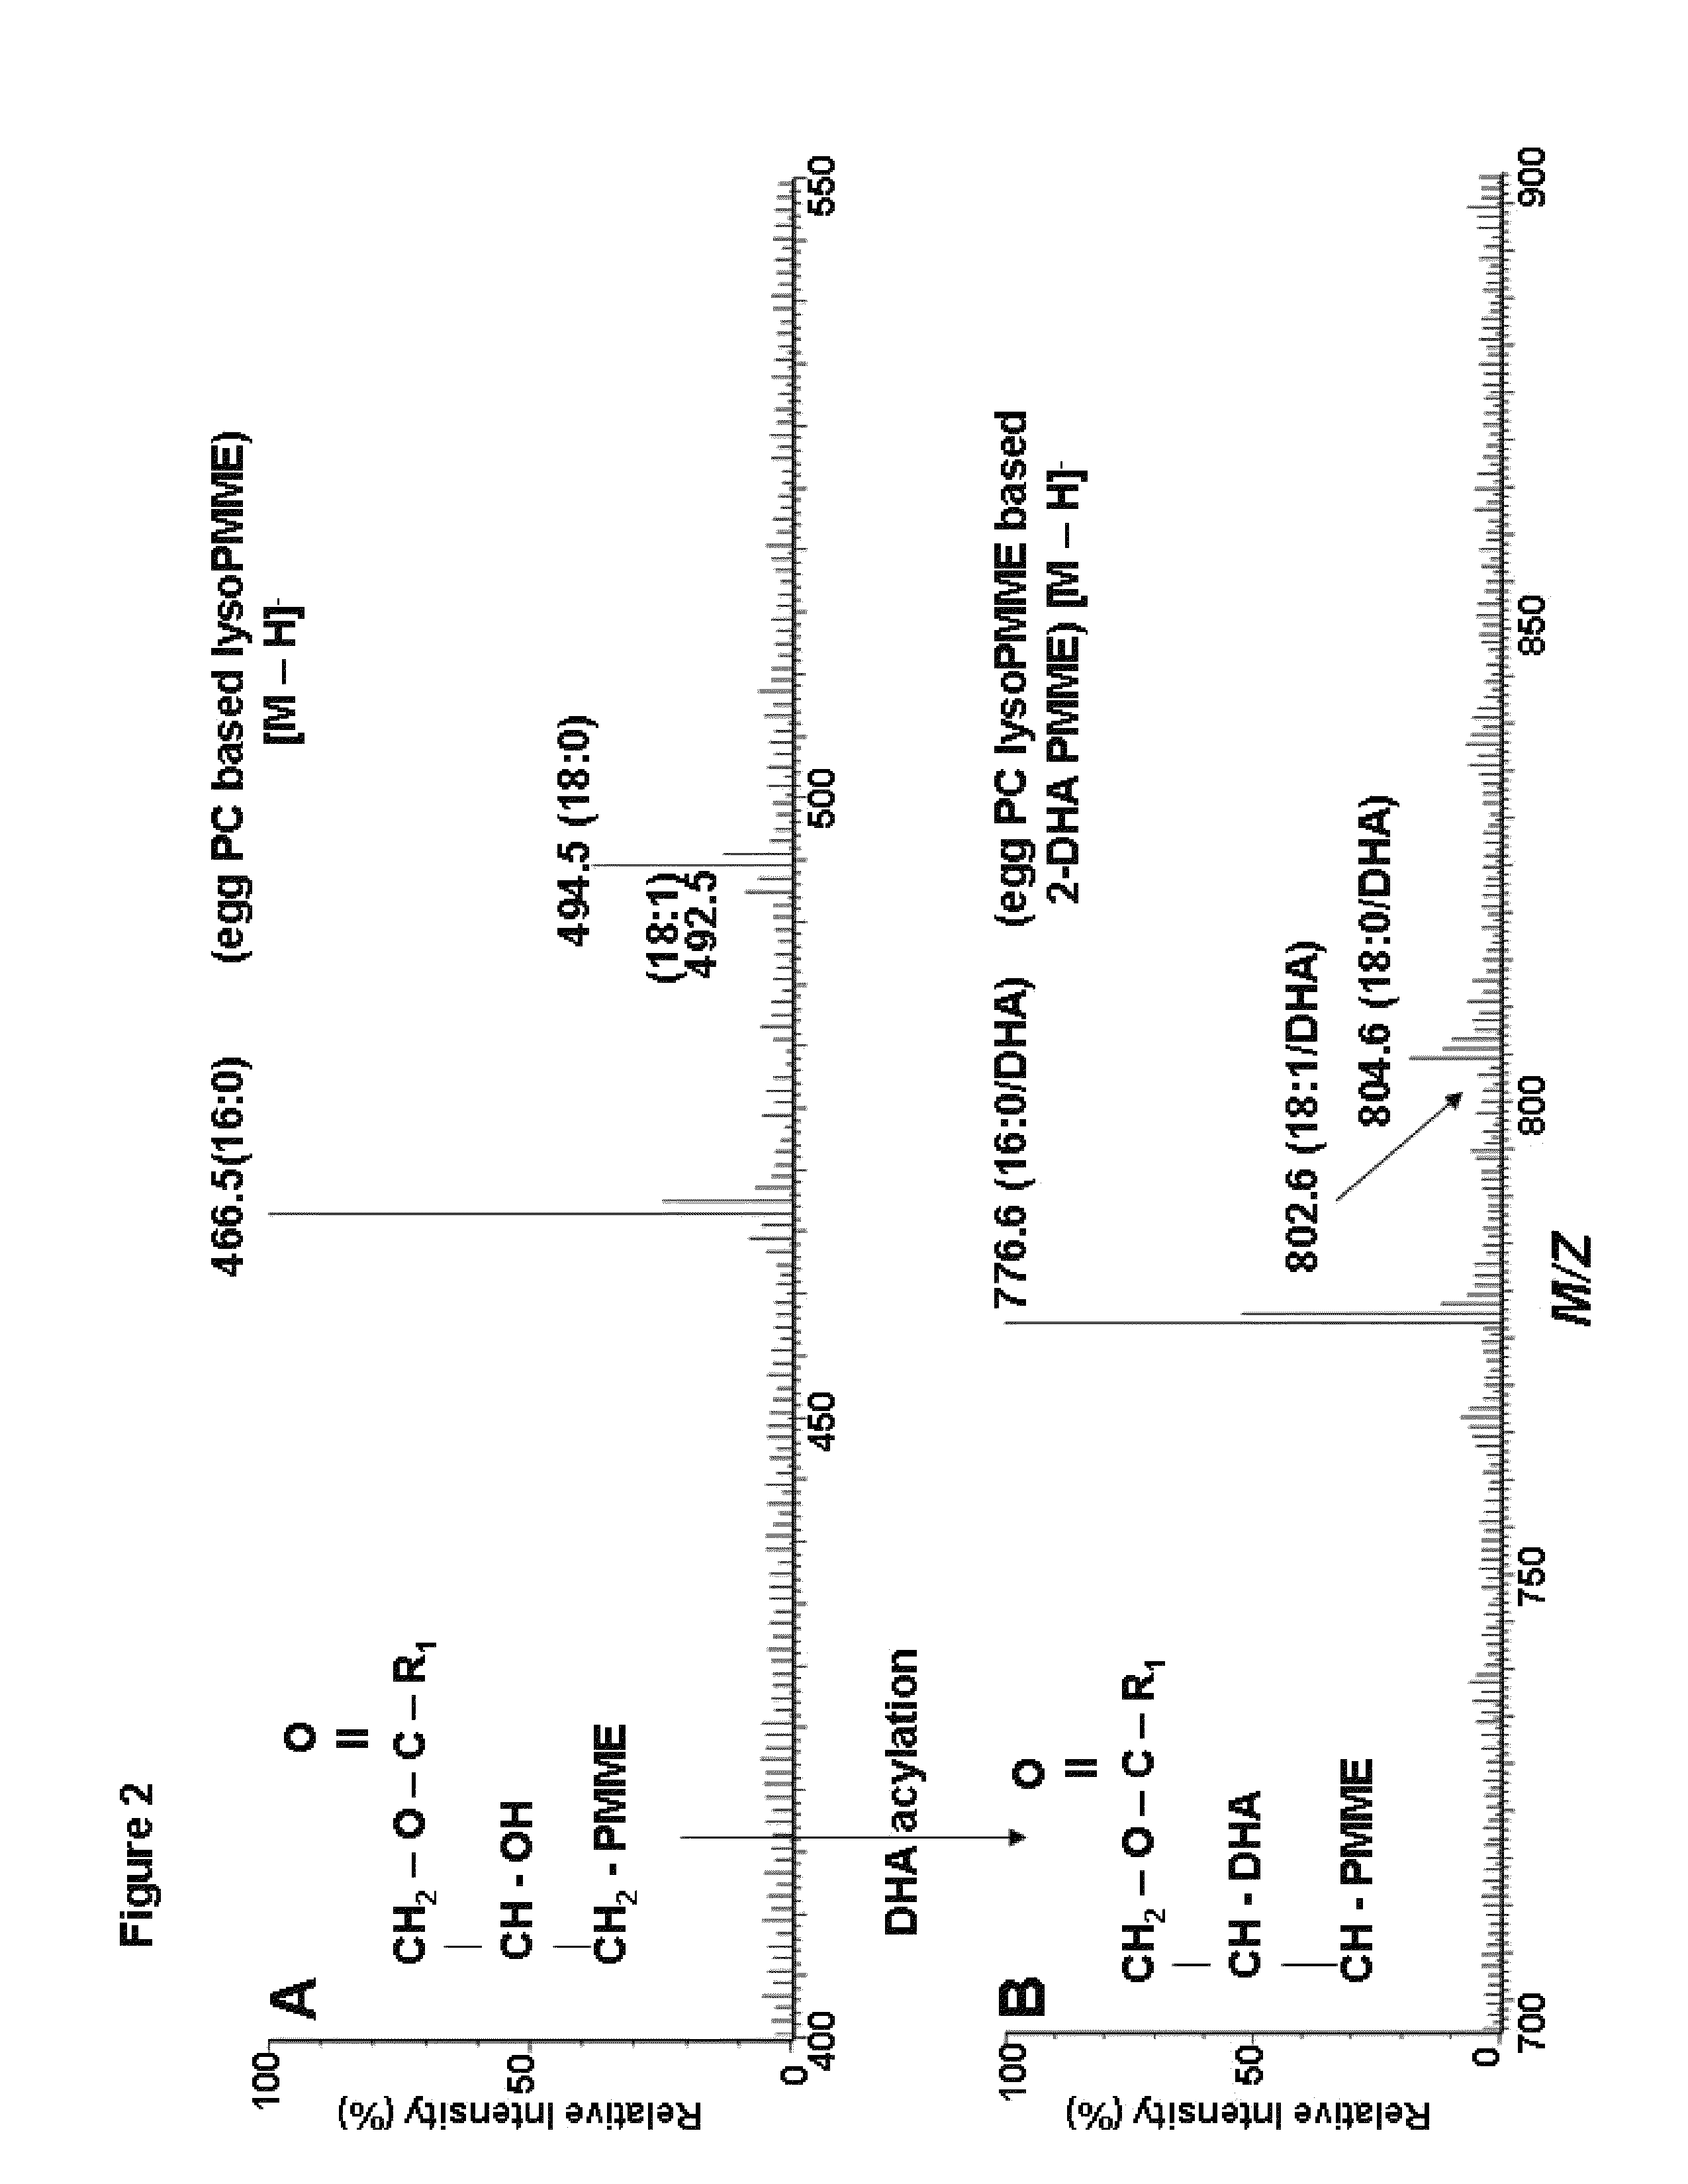 Composition and method for promoting survival of aged basal forebrain cholinergic neuron leading to provention and treatment of age-related neurodegenerative disorder